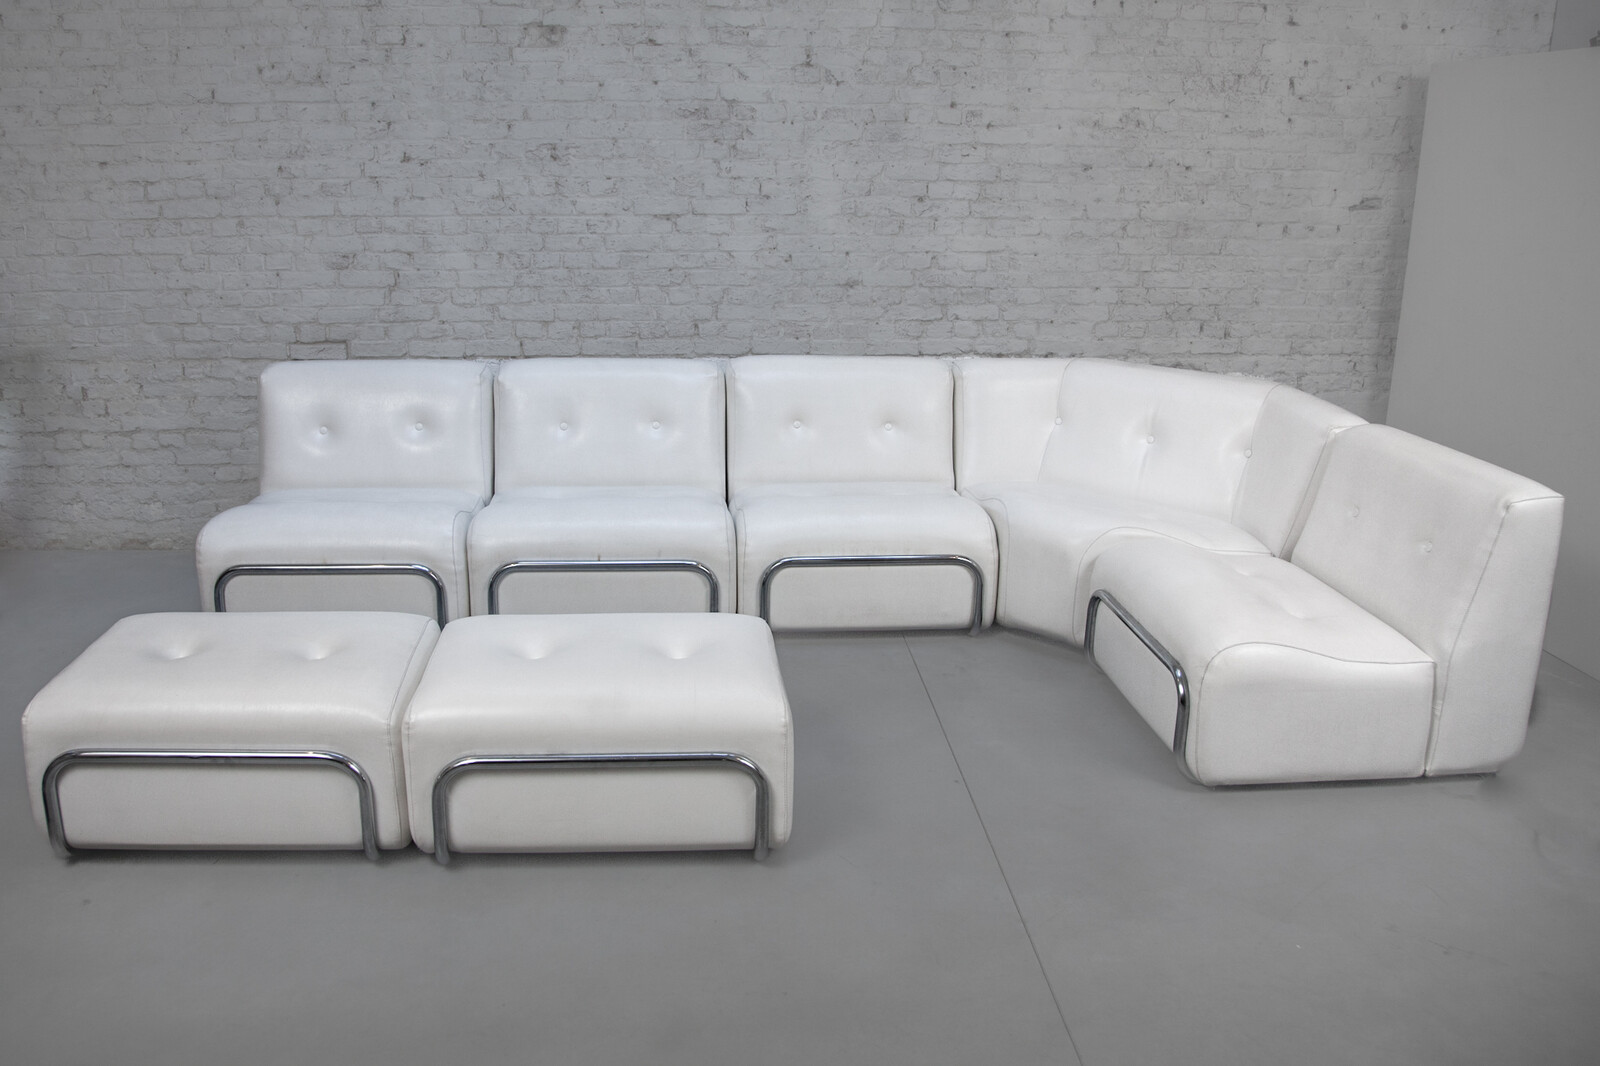 Modular 8 piece Living-roomset with Lounge Chairs and Footstools by Adriano Piazzesi